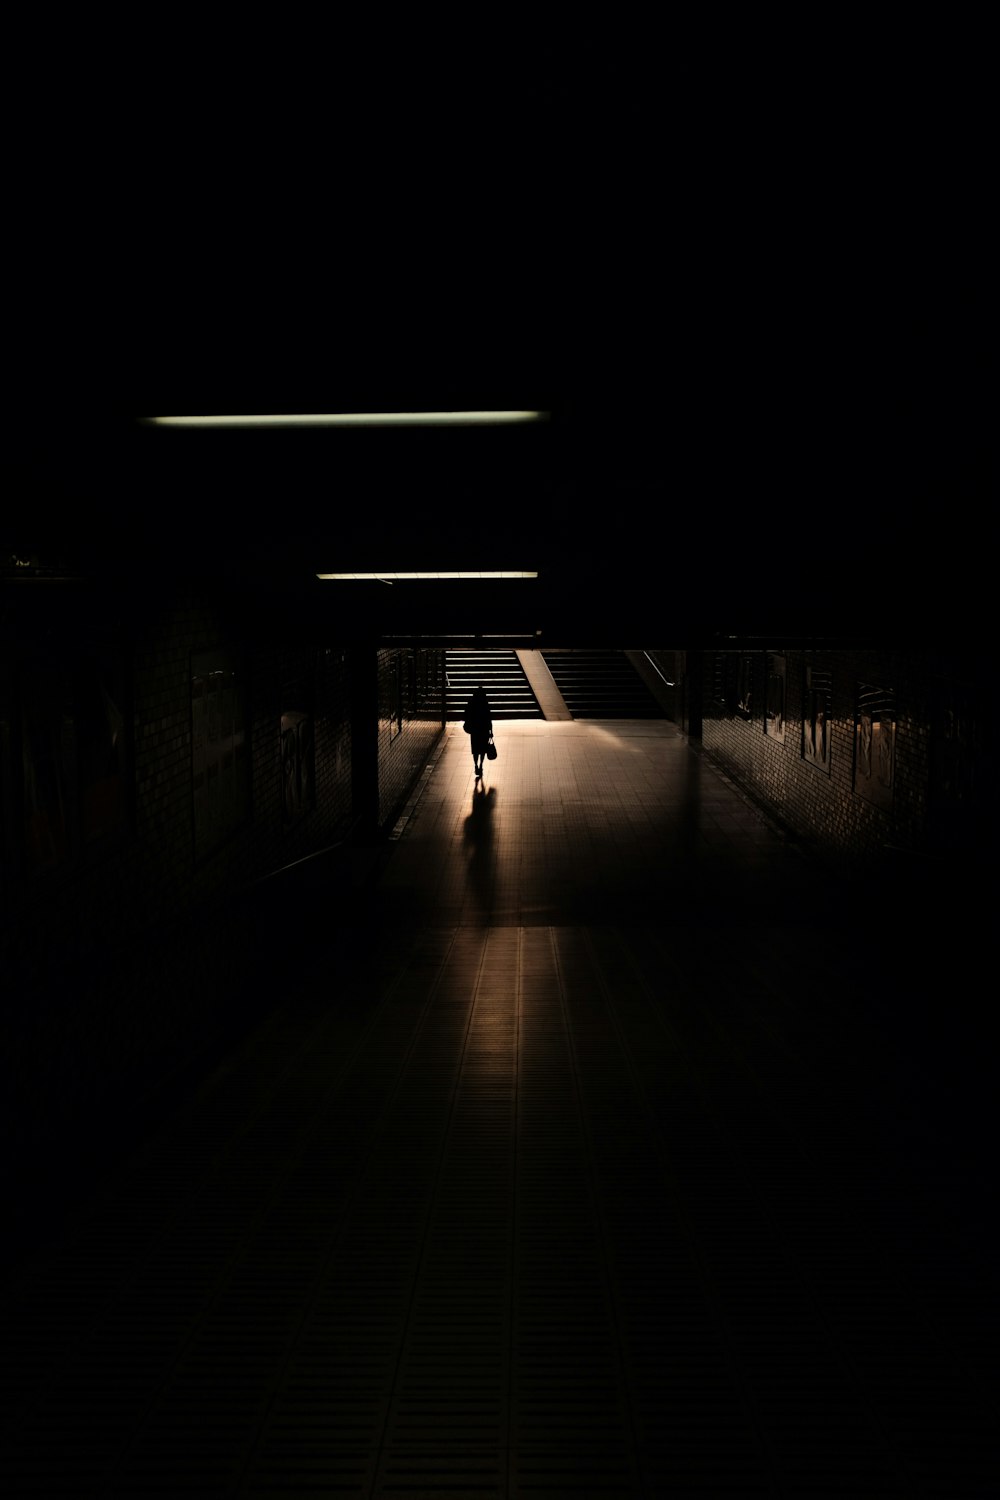 empty hallway with light turned on in the dark